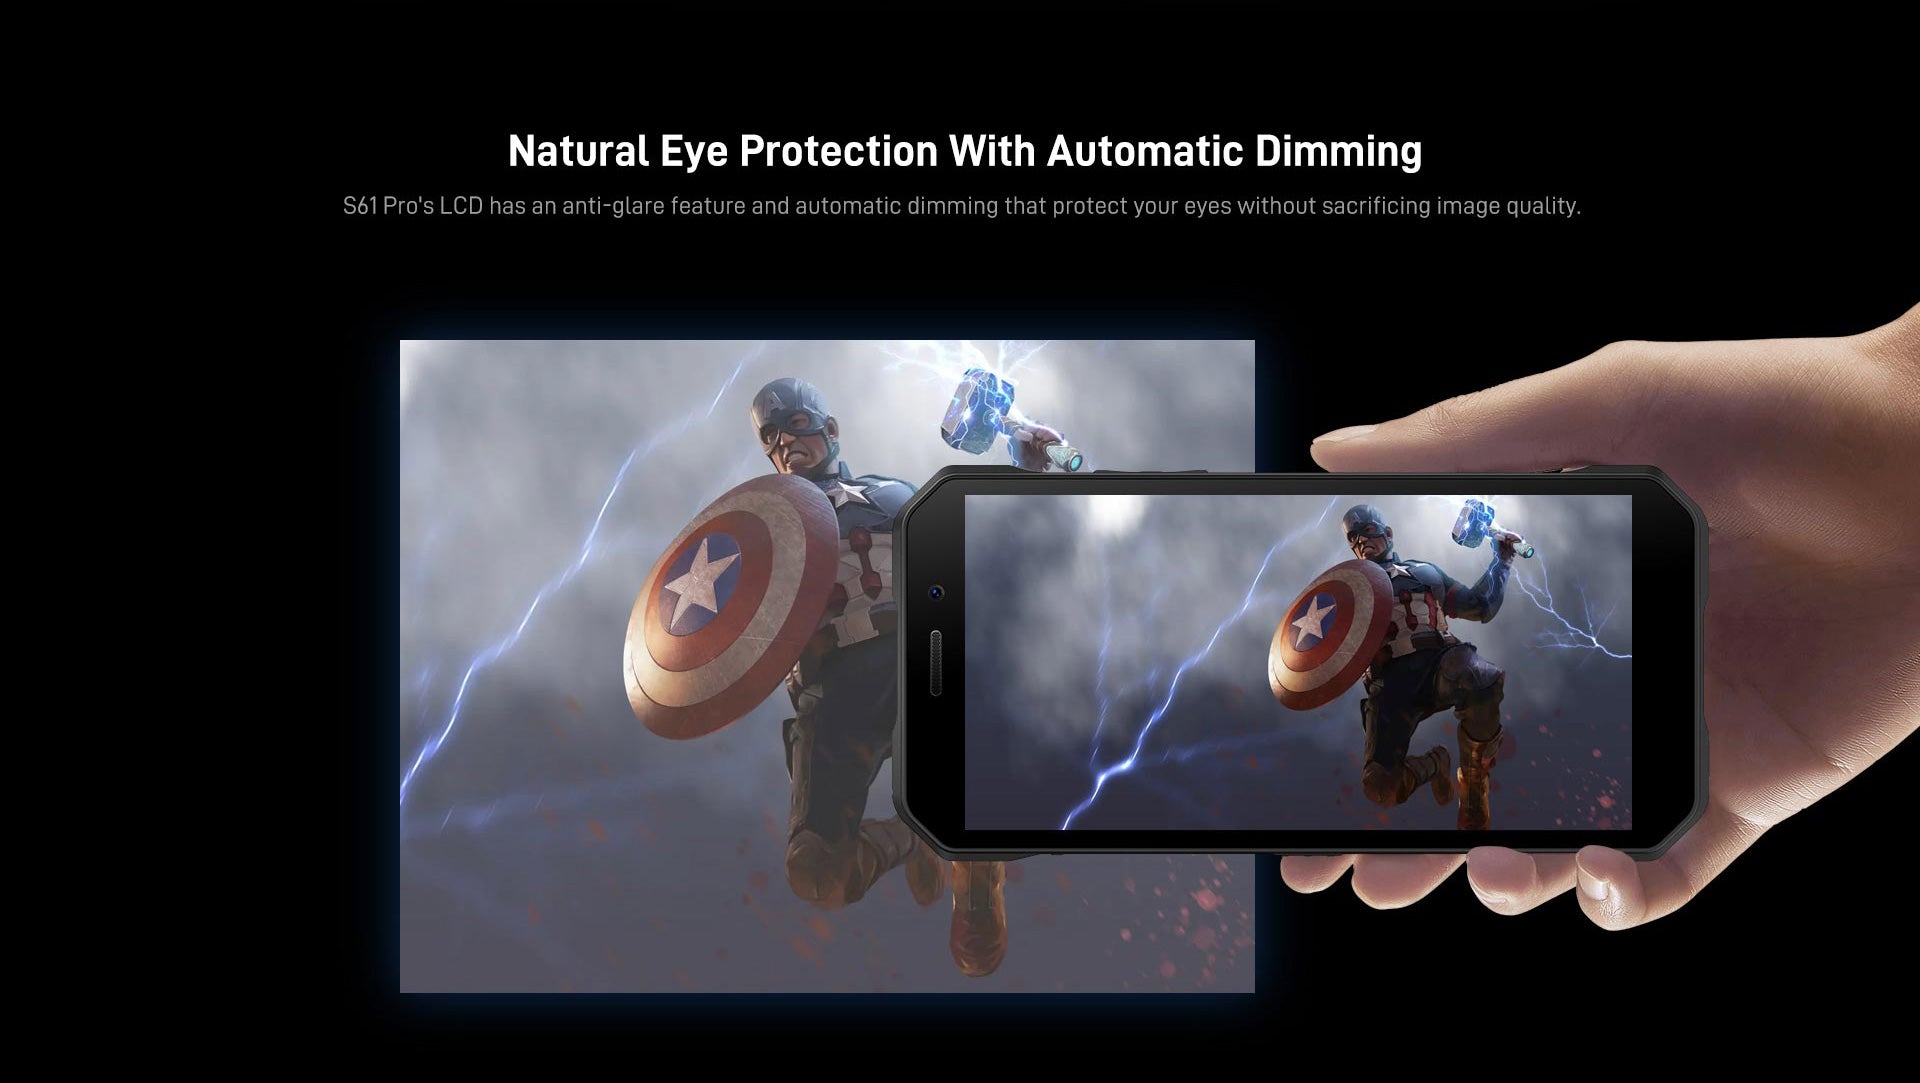 Natural Eye Protection With Automatic Dimming